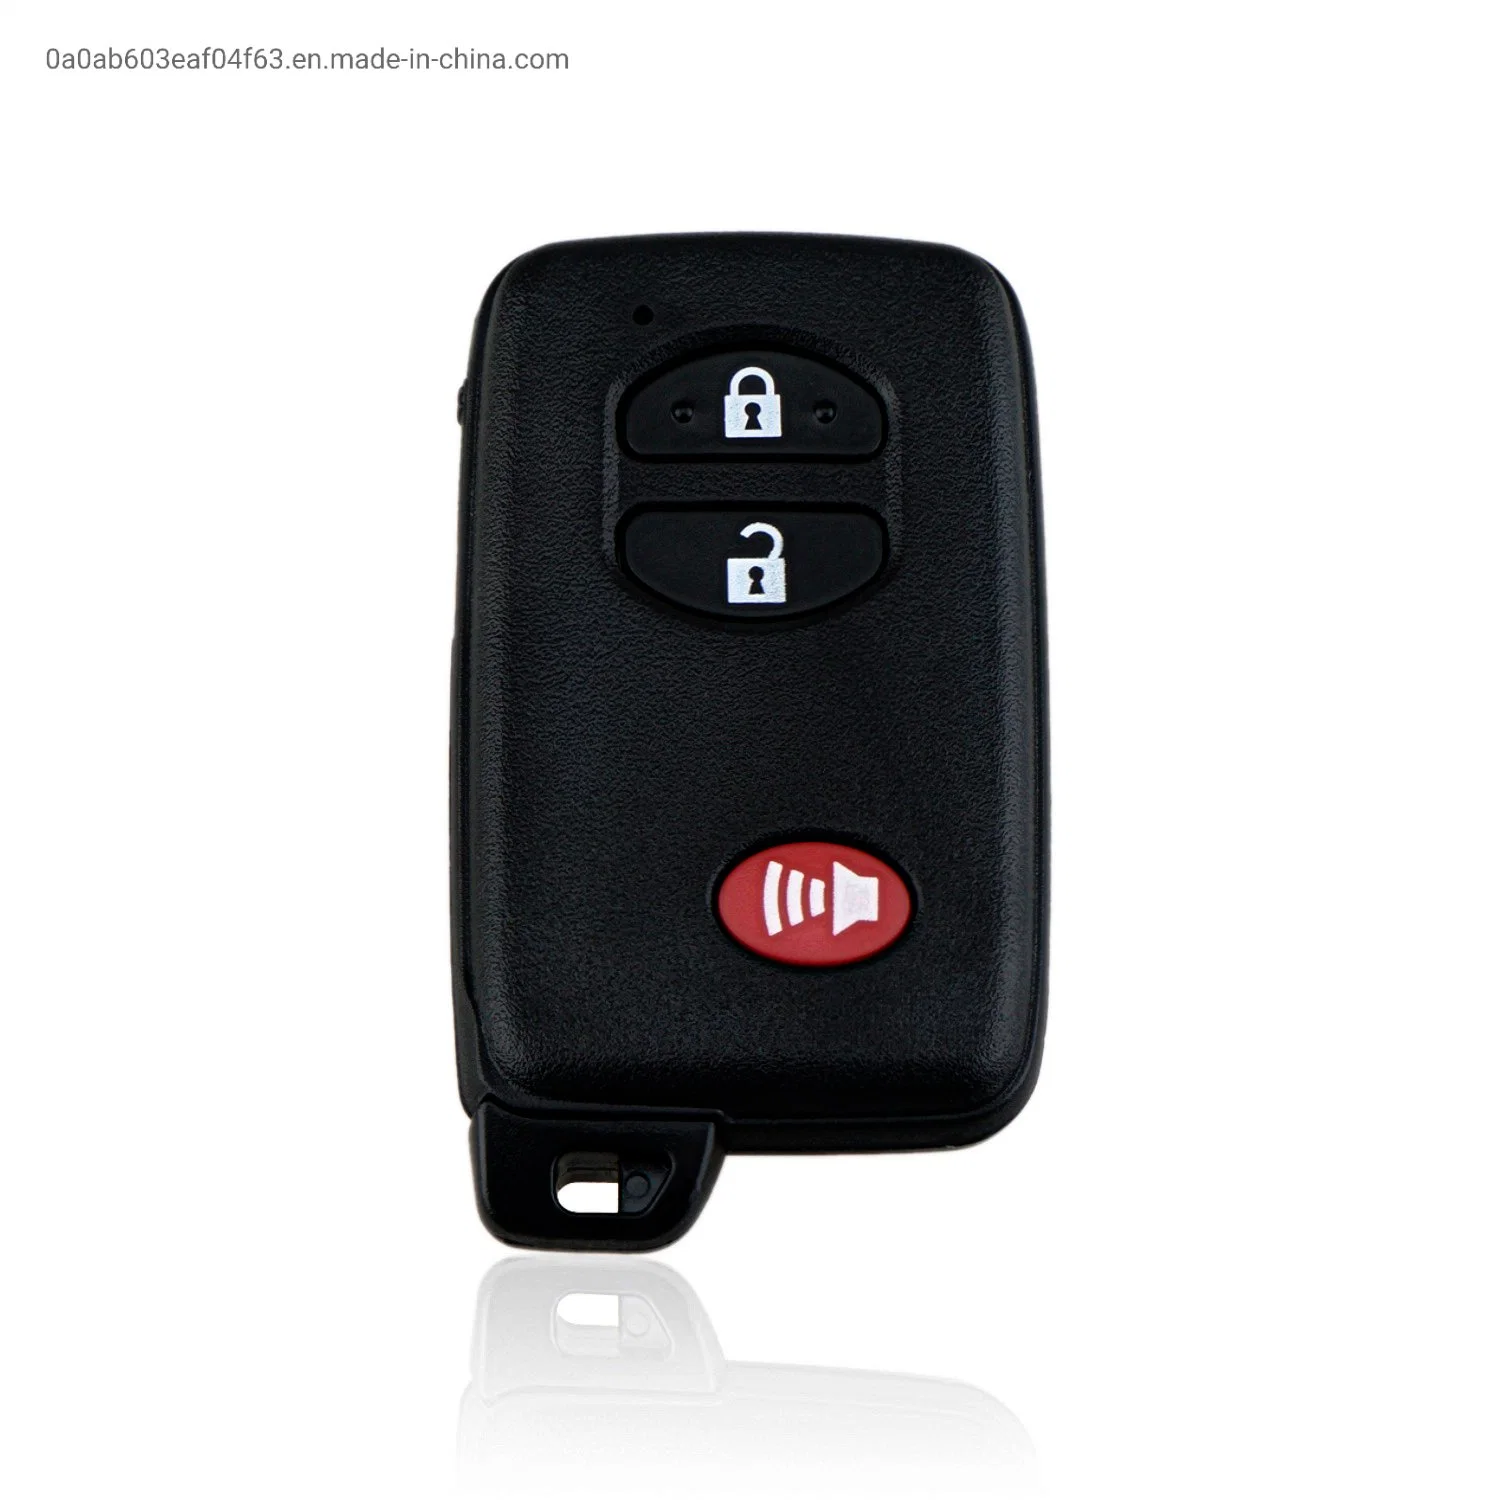 3 Buttons 314.3MHZ Smart Keyless Entry Proximity Remote Fob Car Key For 2009-2013 Toyota Venza Prius 4Runner FCC ID : HYQ14ACX